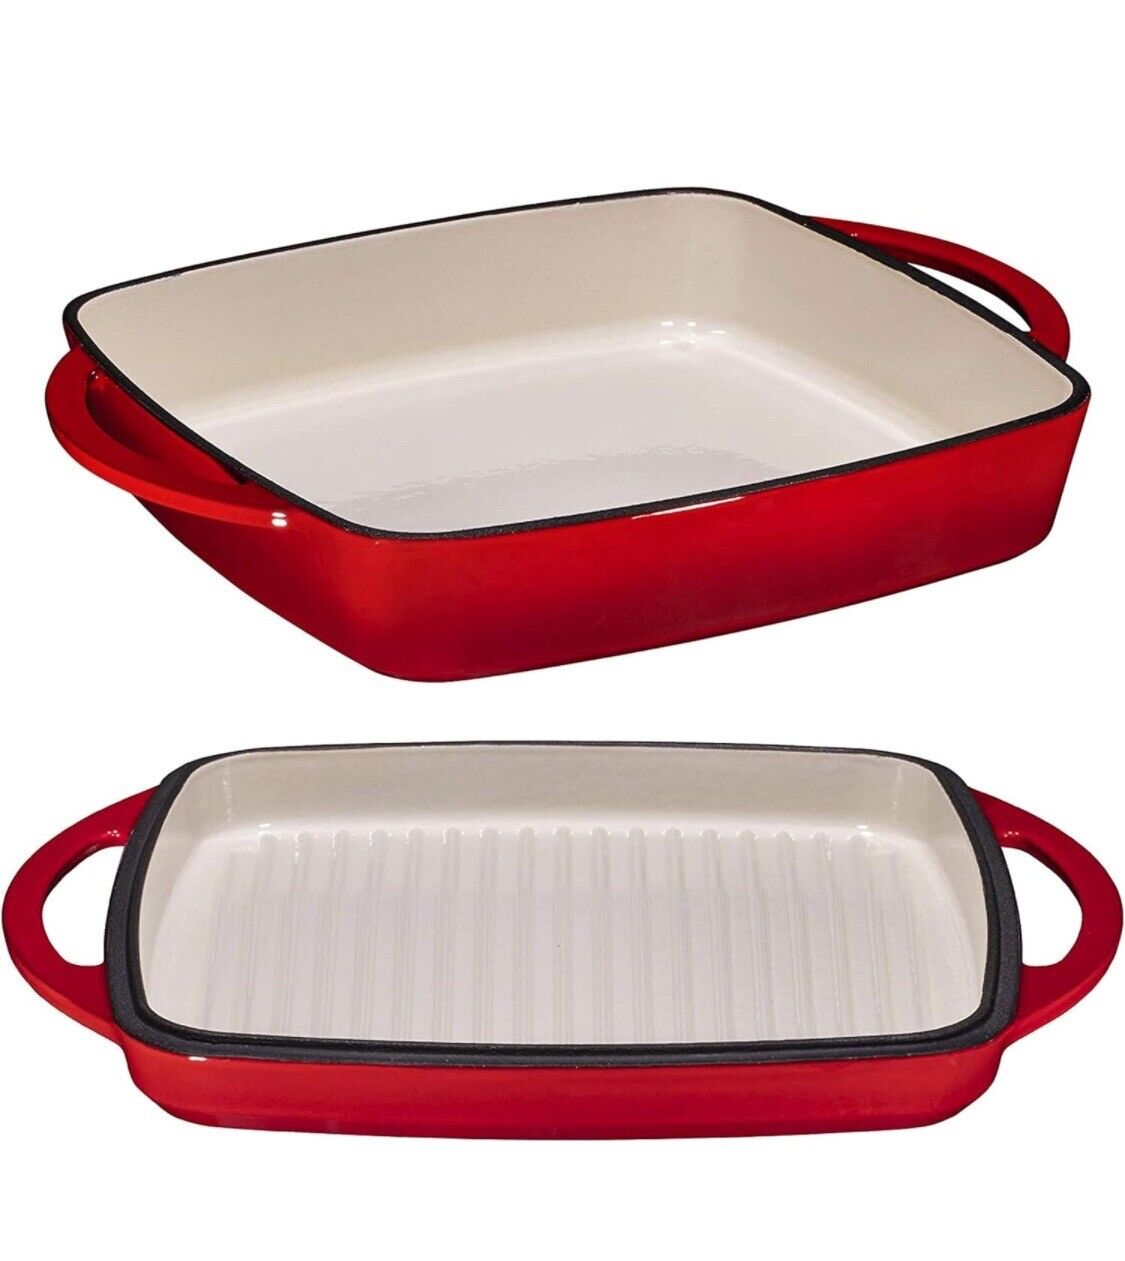 2-In-1 Square Enameled Cast Iron Dutch Oven Baking Pan and Gridle Lid with Dual 